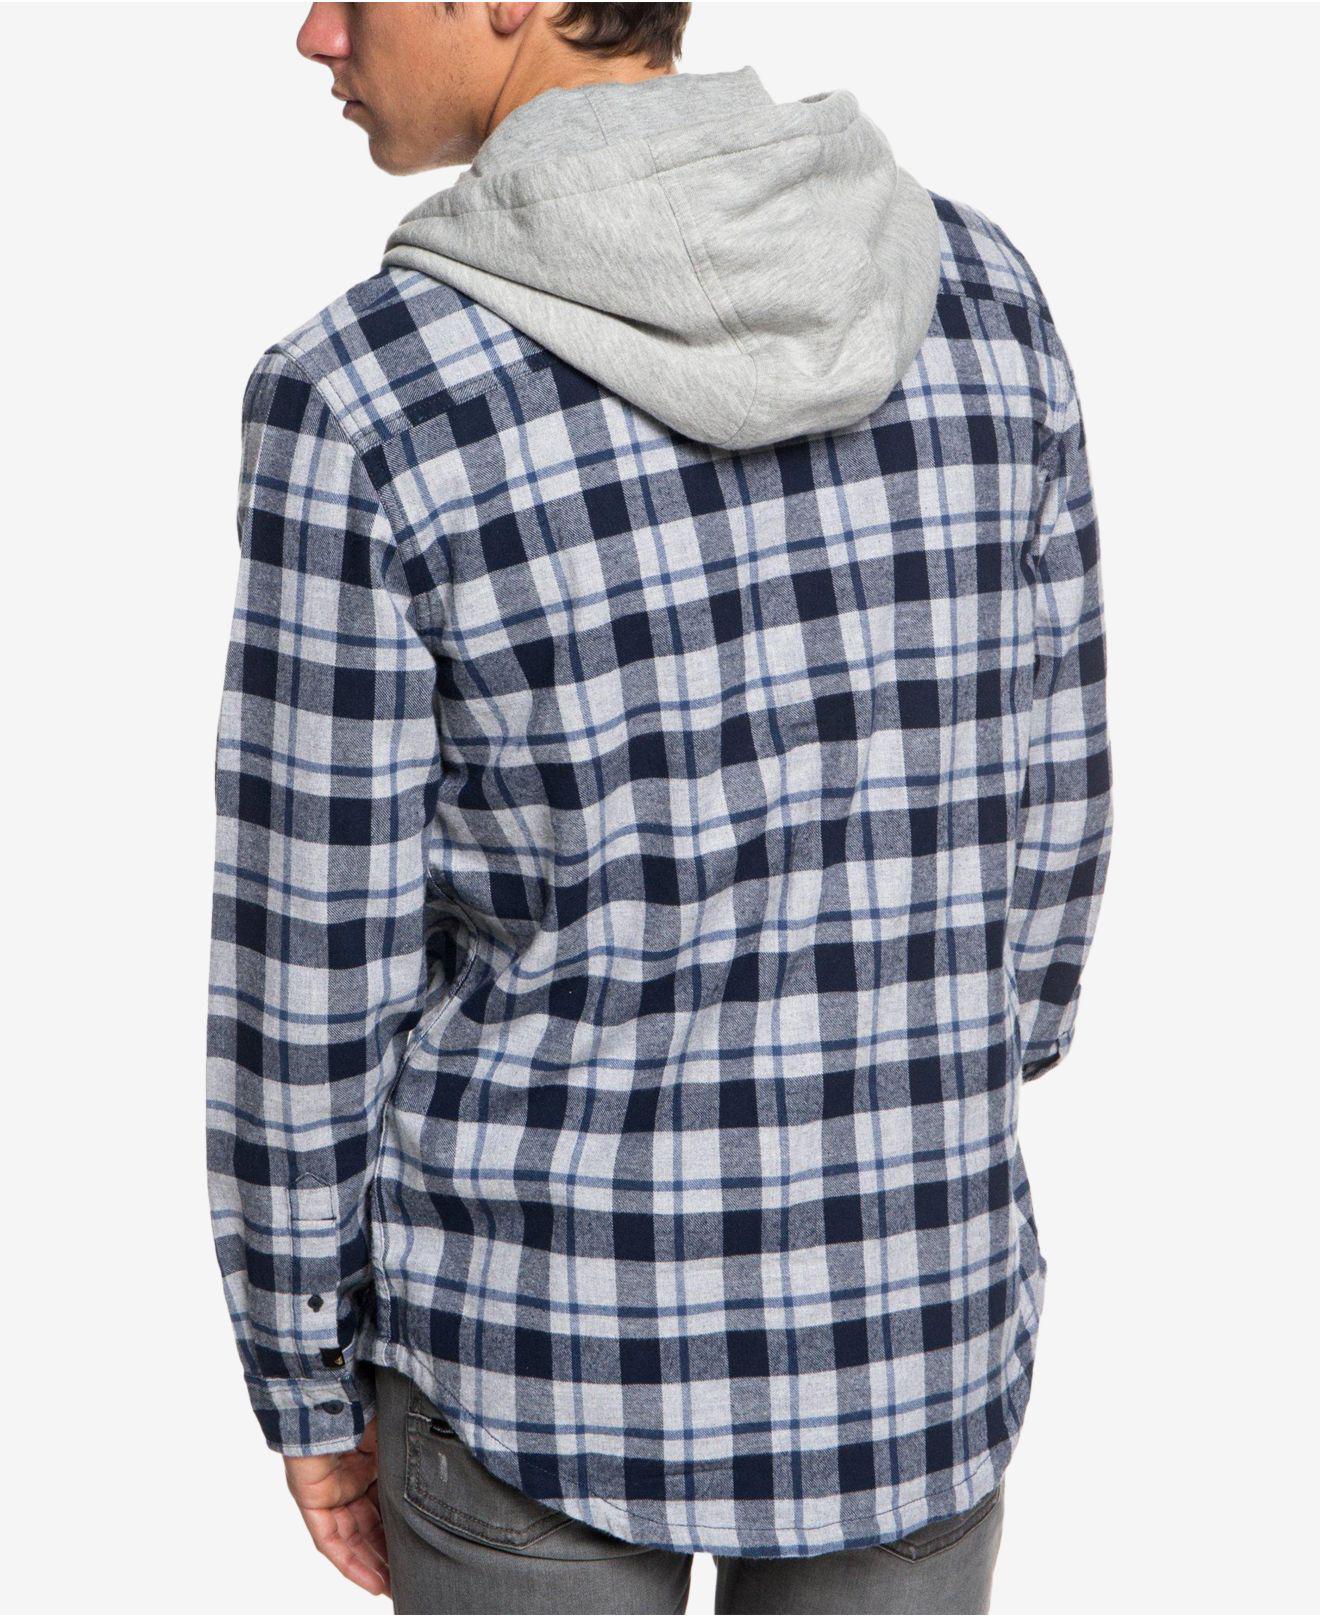 X10 L9 Quiksilver Quiksilver XL Youths Blue 19" Chest Check Flannel Hooded Casual Shirt 